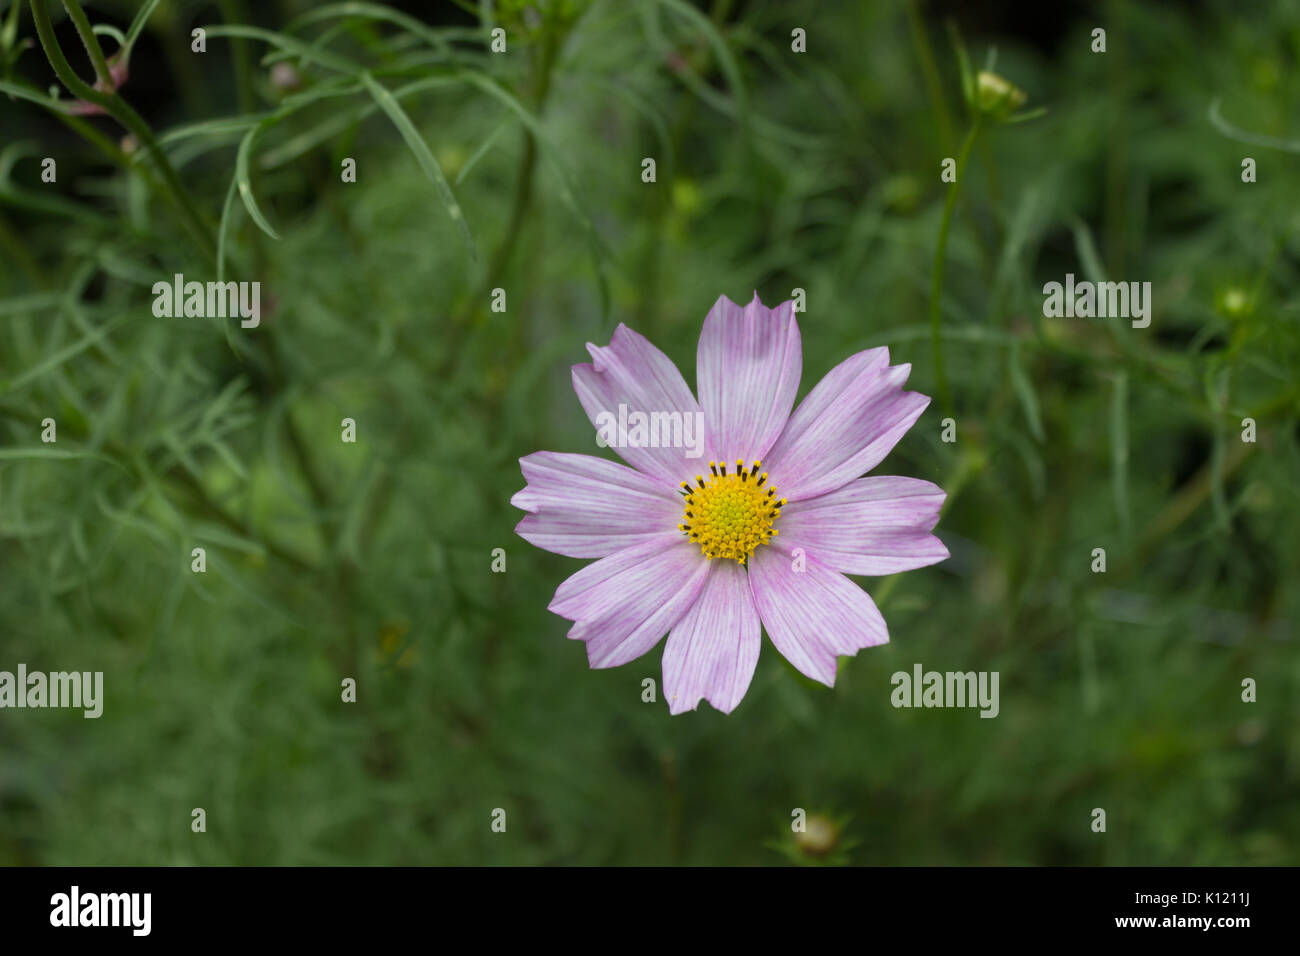 A single bright light pink Cosmos flower with eight petals and a yellow centre on a stem in full bloom in Summer in the garden with green leaves in th Stock Photo